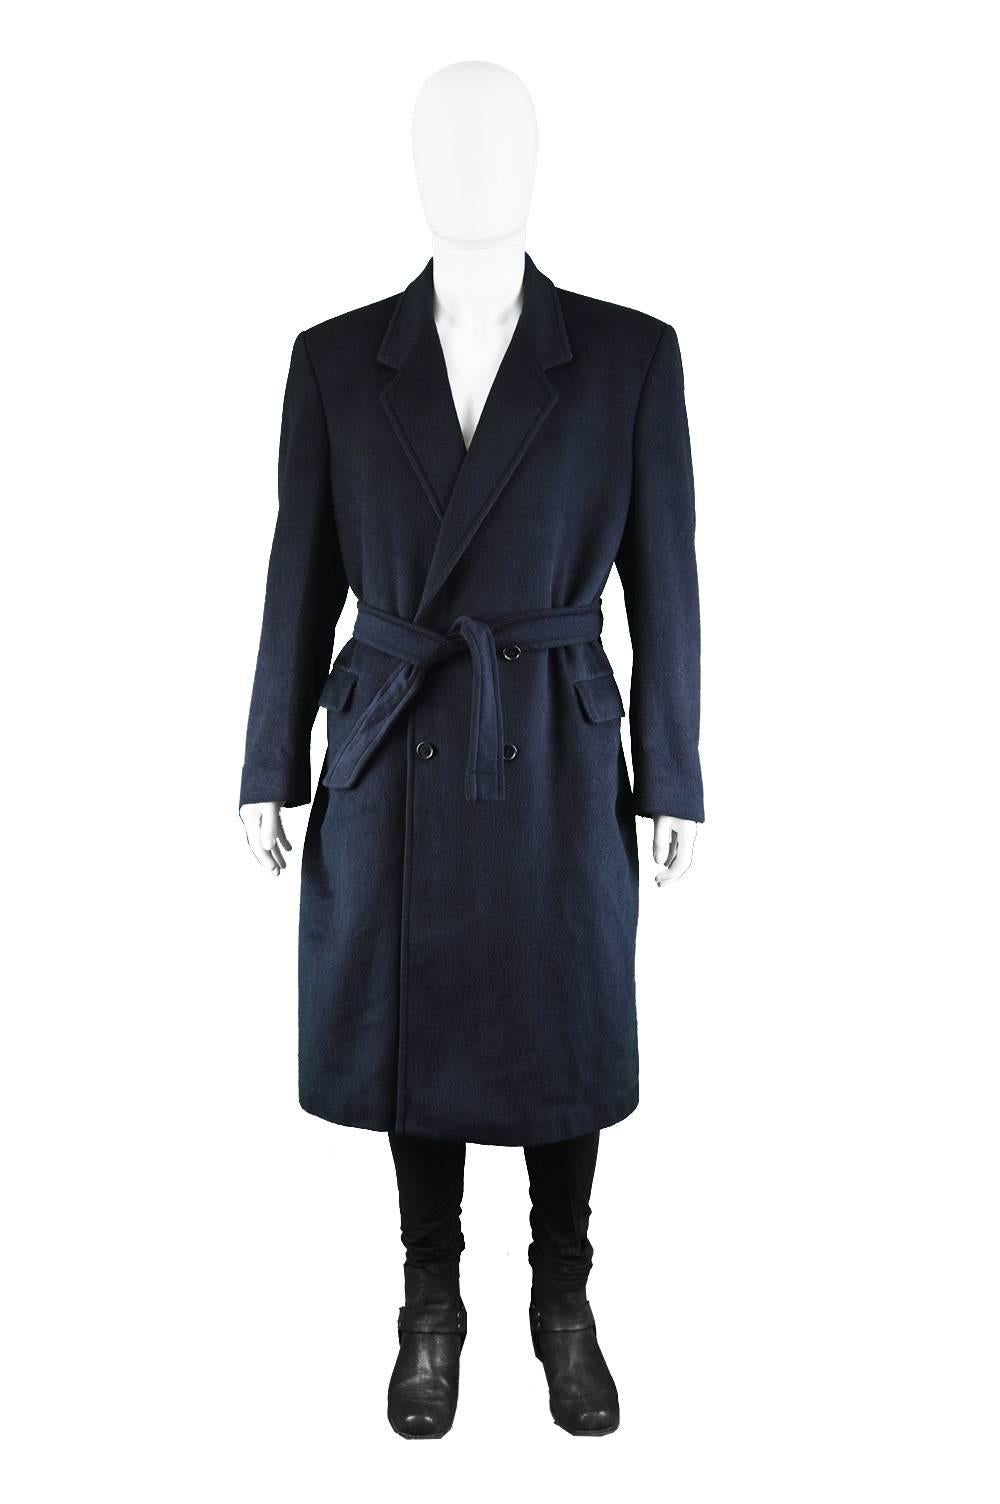 Pierre Cardin Mens Navy Blue Cashmere & Wool Belted Vintage Overcoat, 1980s

Estimated Size: Men's Large to XL. Please check measurements.
Chest - 46” / 117cm (allow roughly 2-4